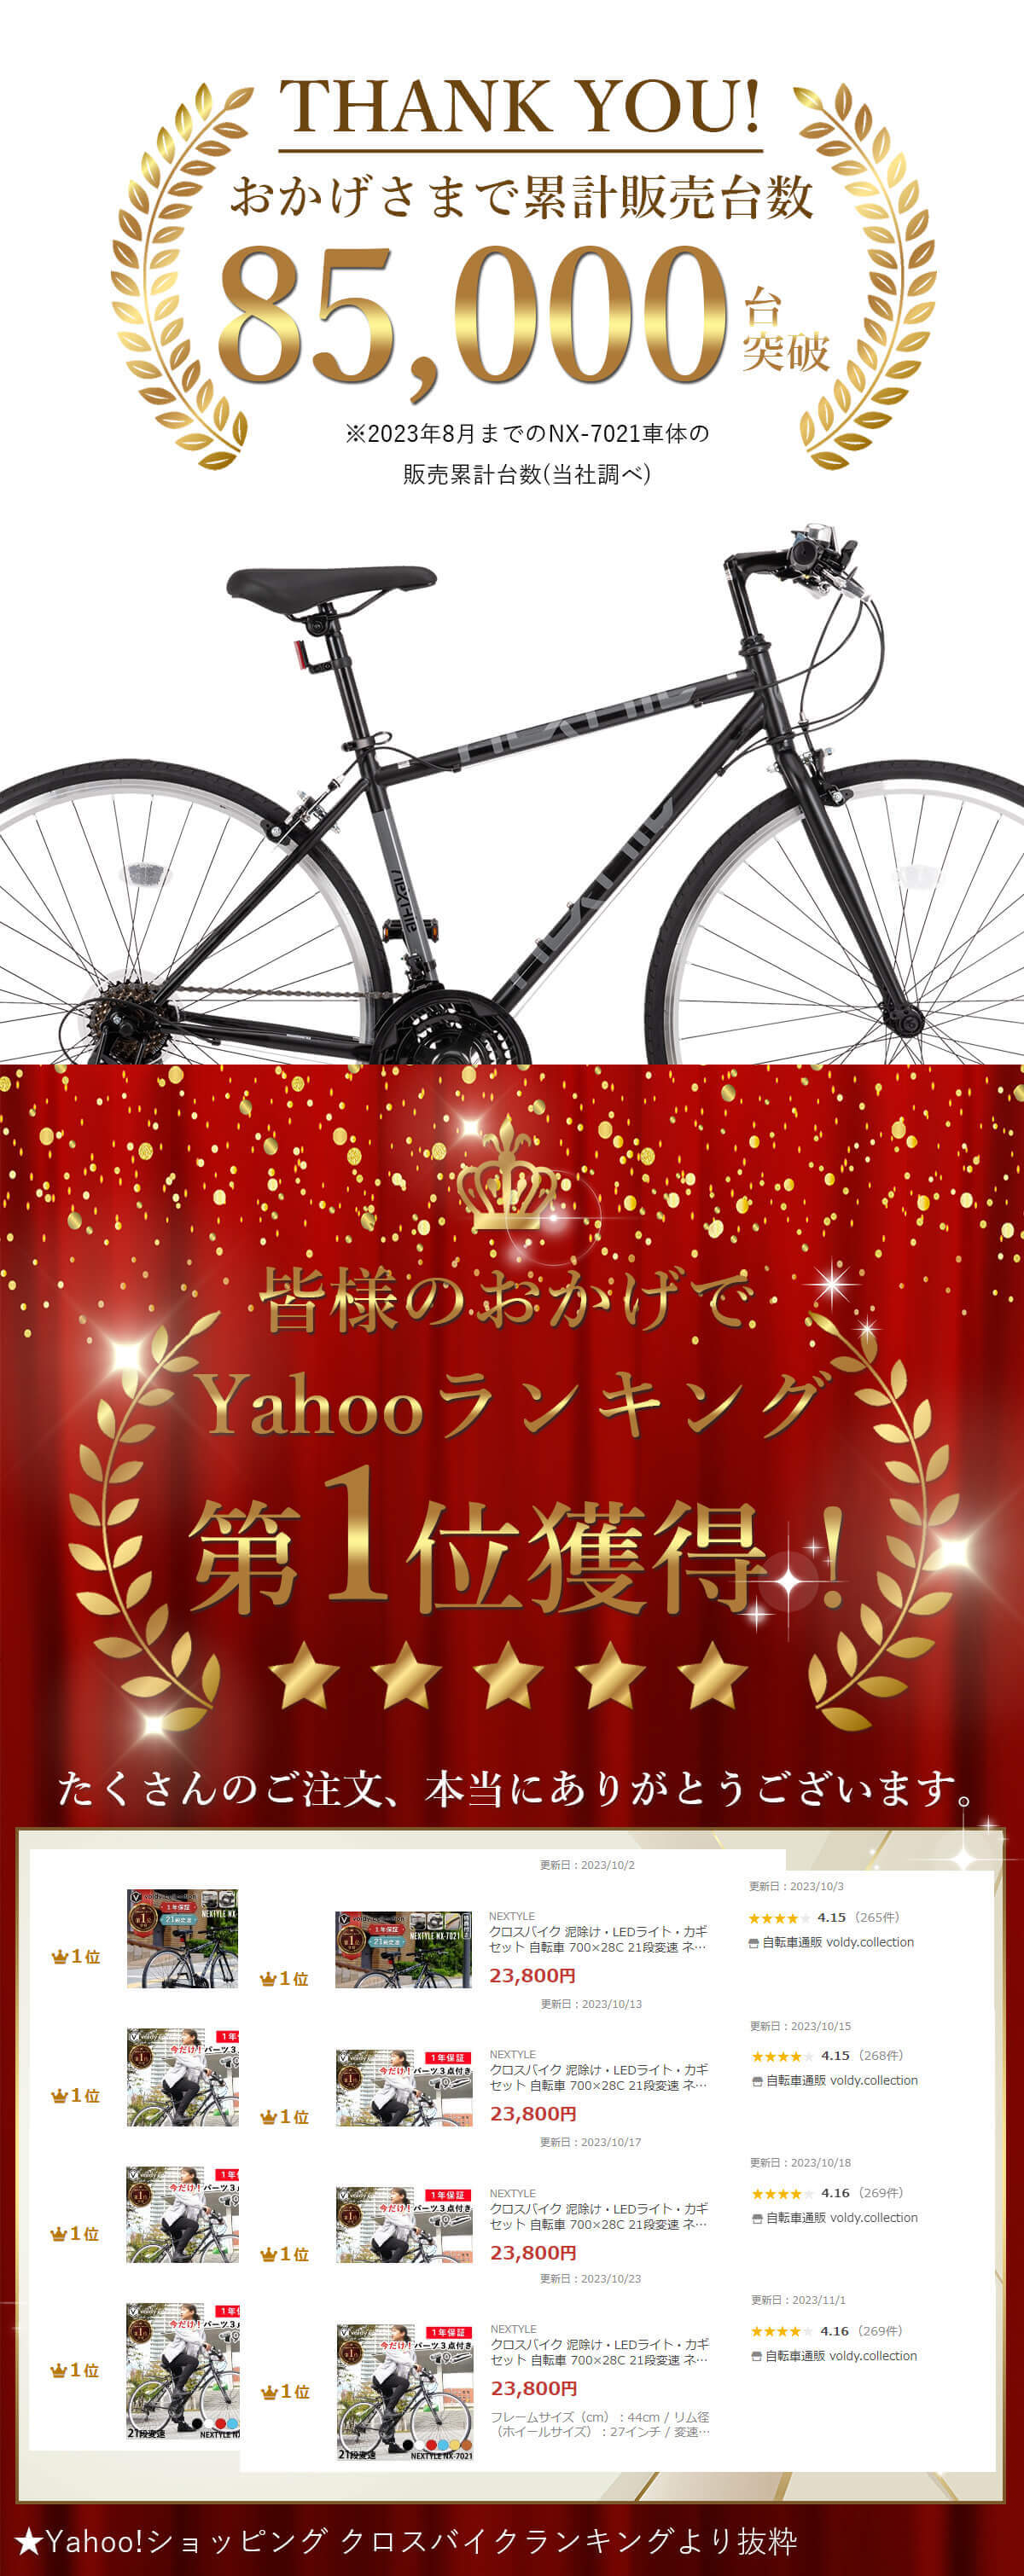  cross bike bicycle mud guard *LED light * key present light weight 700×28C 21 step shifting gears nek style NEXTYLE NX-7021-CR beginner woman commuting going to school bicycle stylish woman 